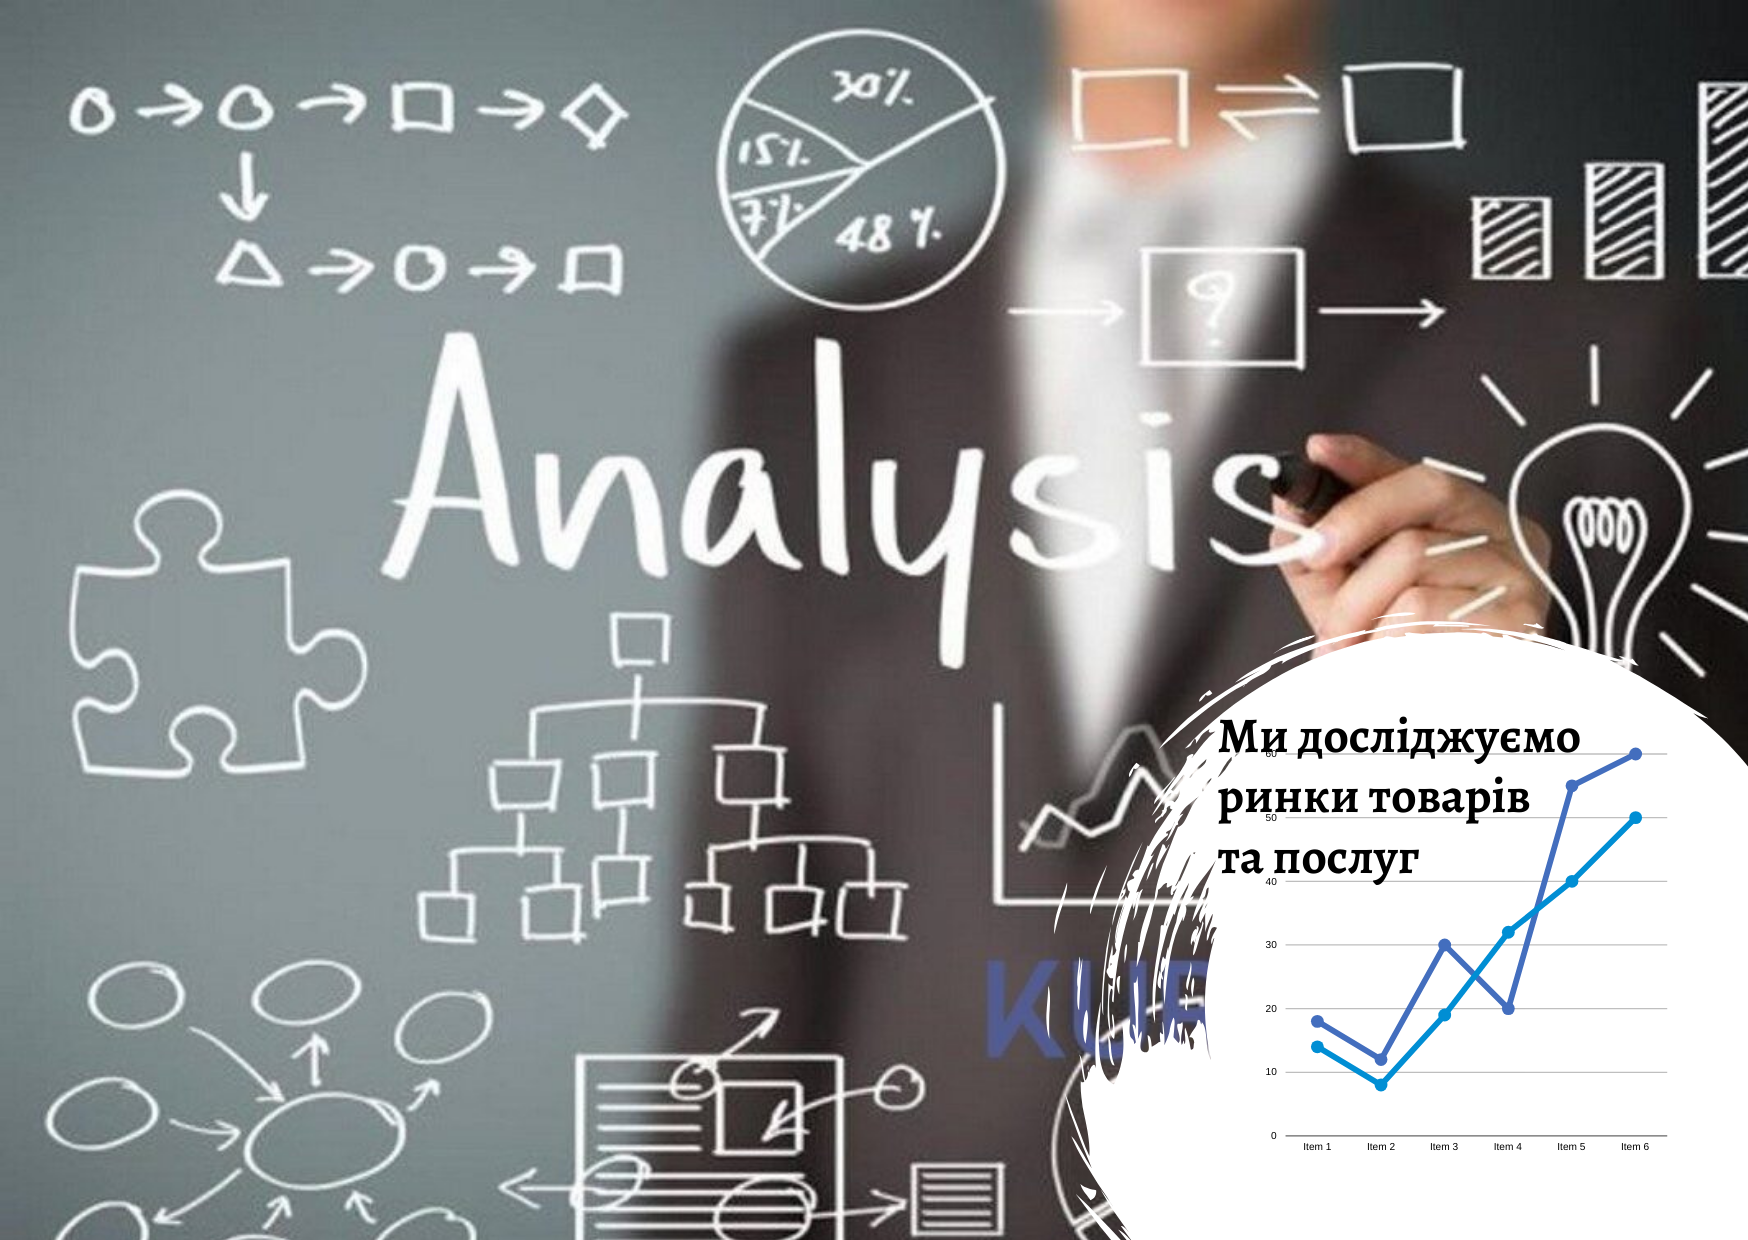 Pro-Consulting Сompany offers market analysis for its clients